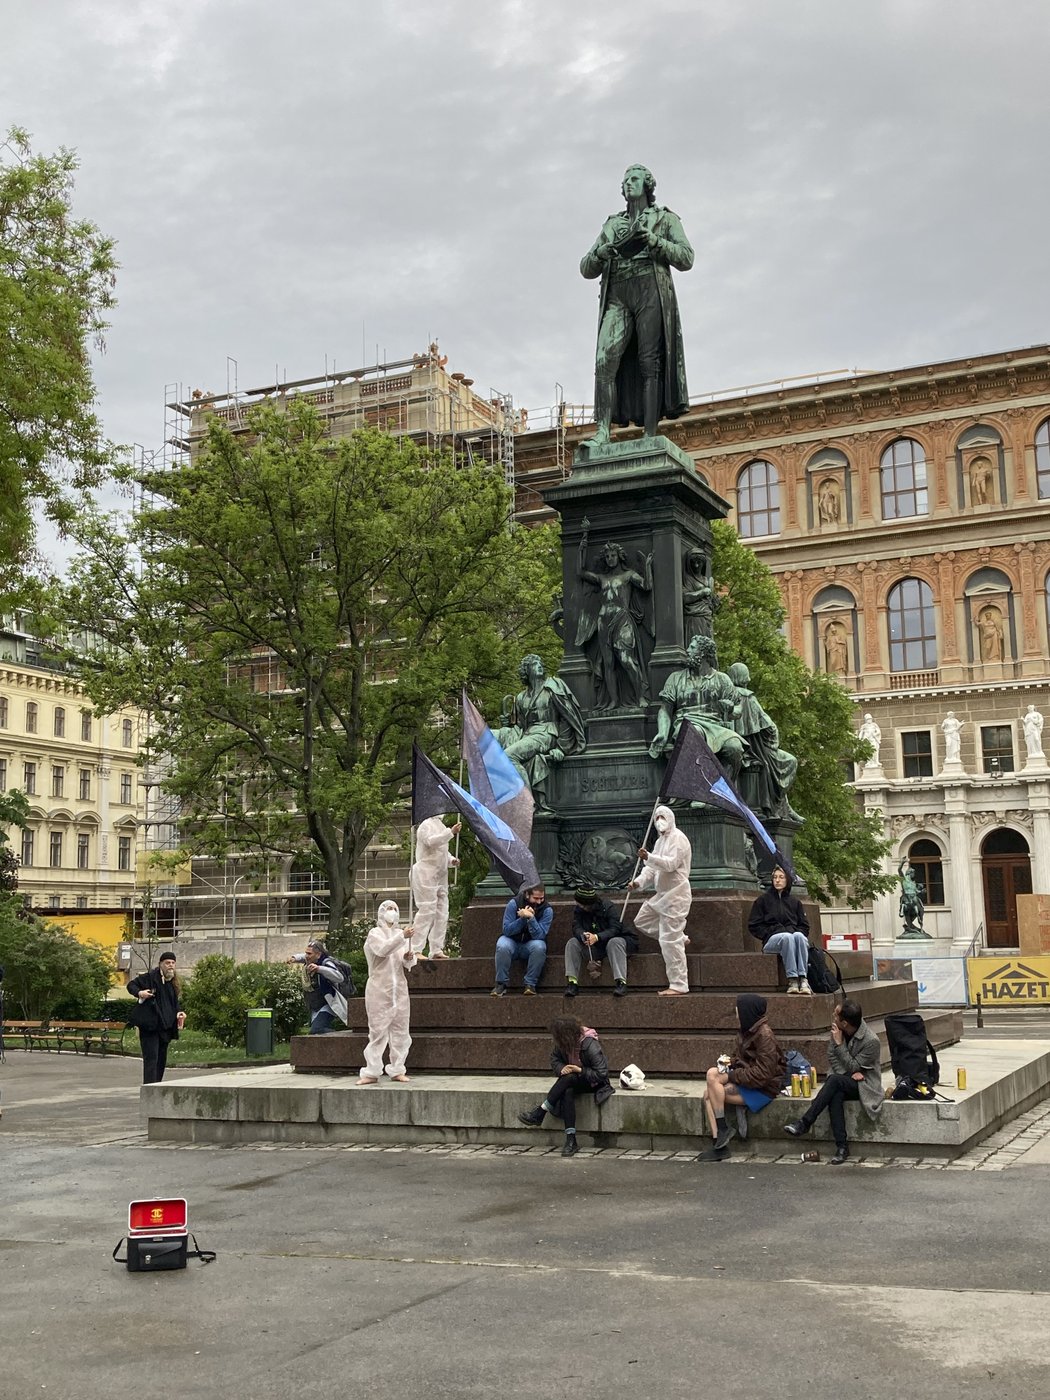 The picture shows a group of students sitting on the pedestal of the Schiller monument. Three of them have white suits and FFP2 masks on, they carry black flags with a blue sign.